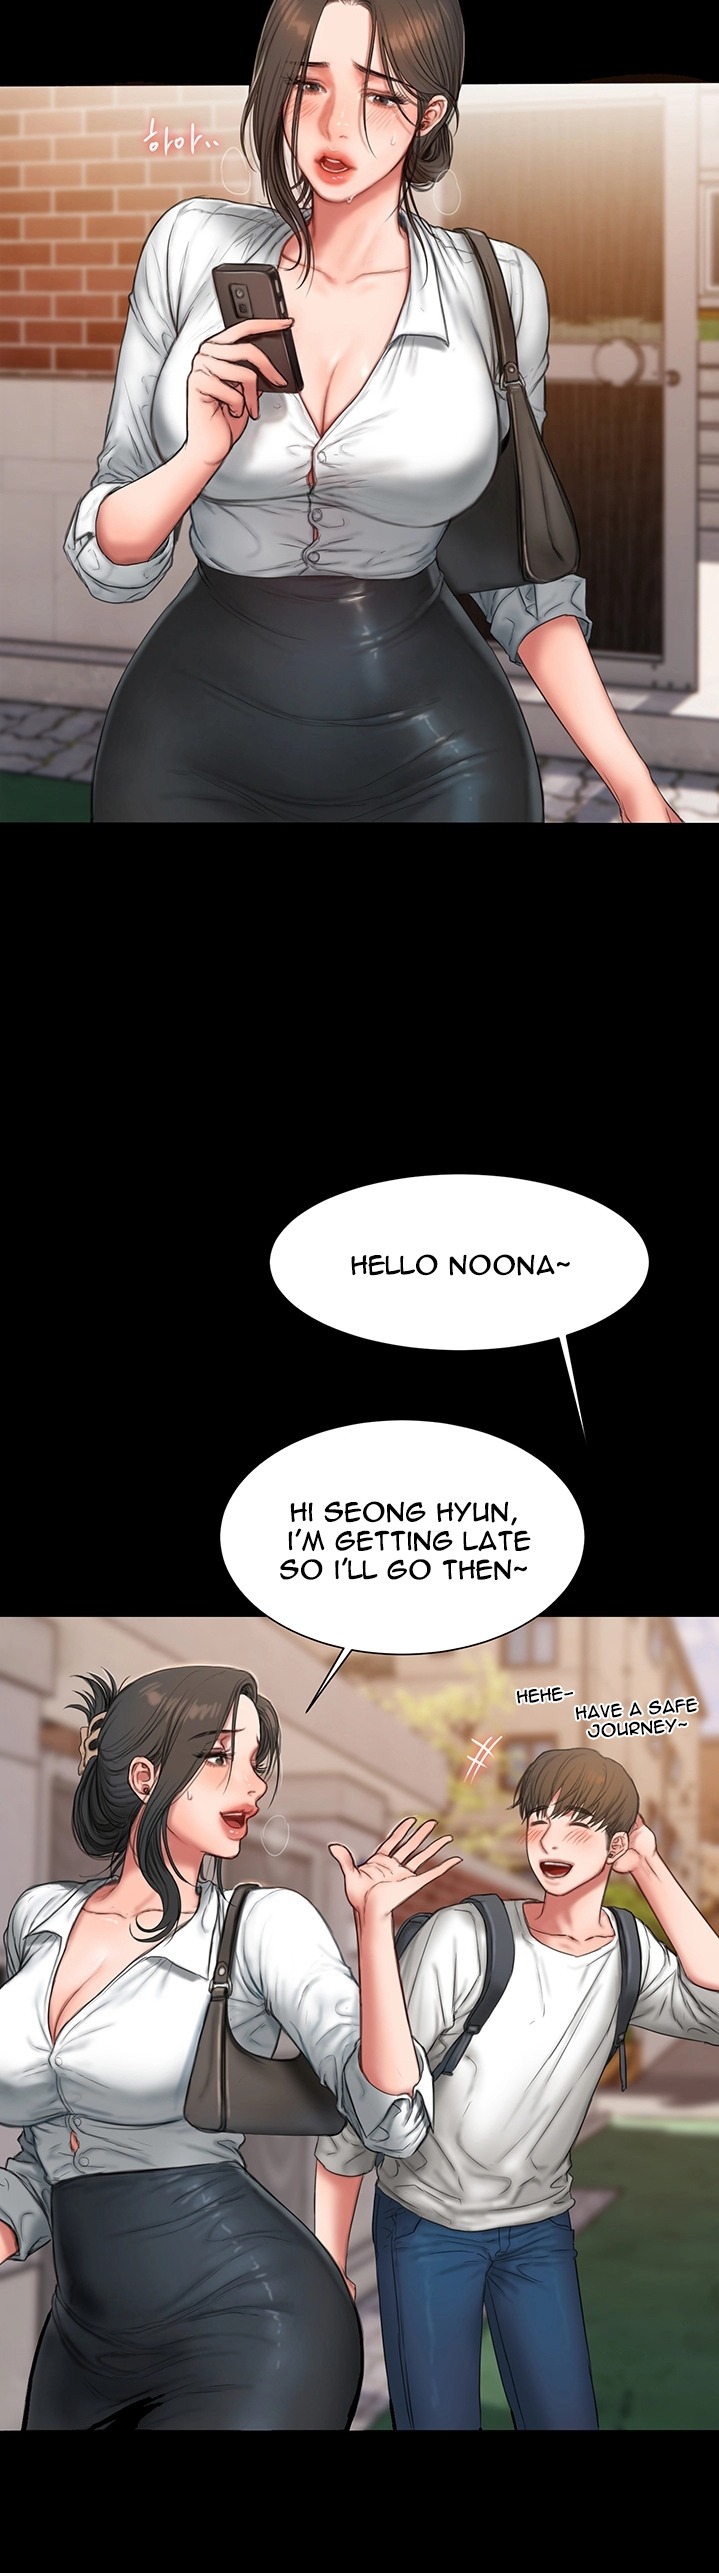 Friends Manhwa - Chapter 1 Page 5